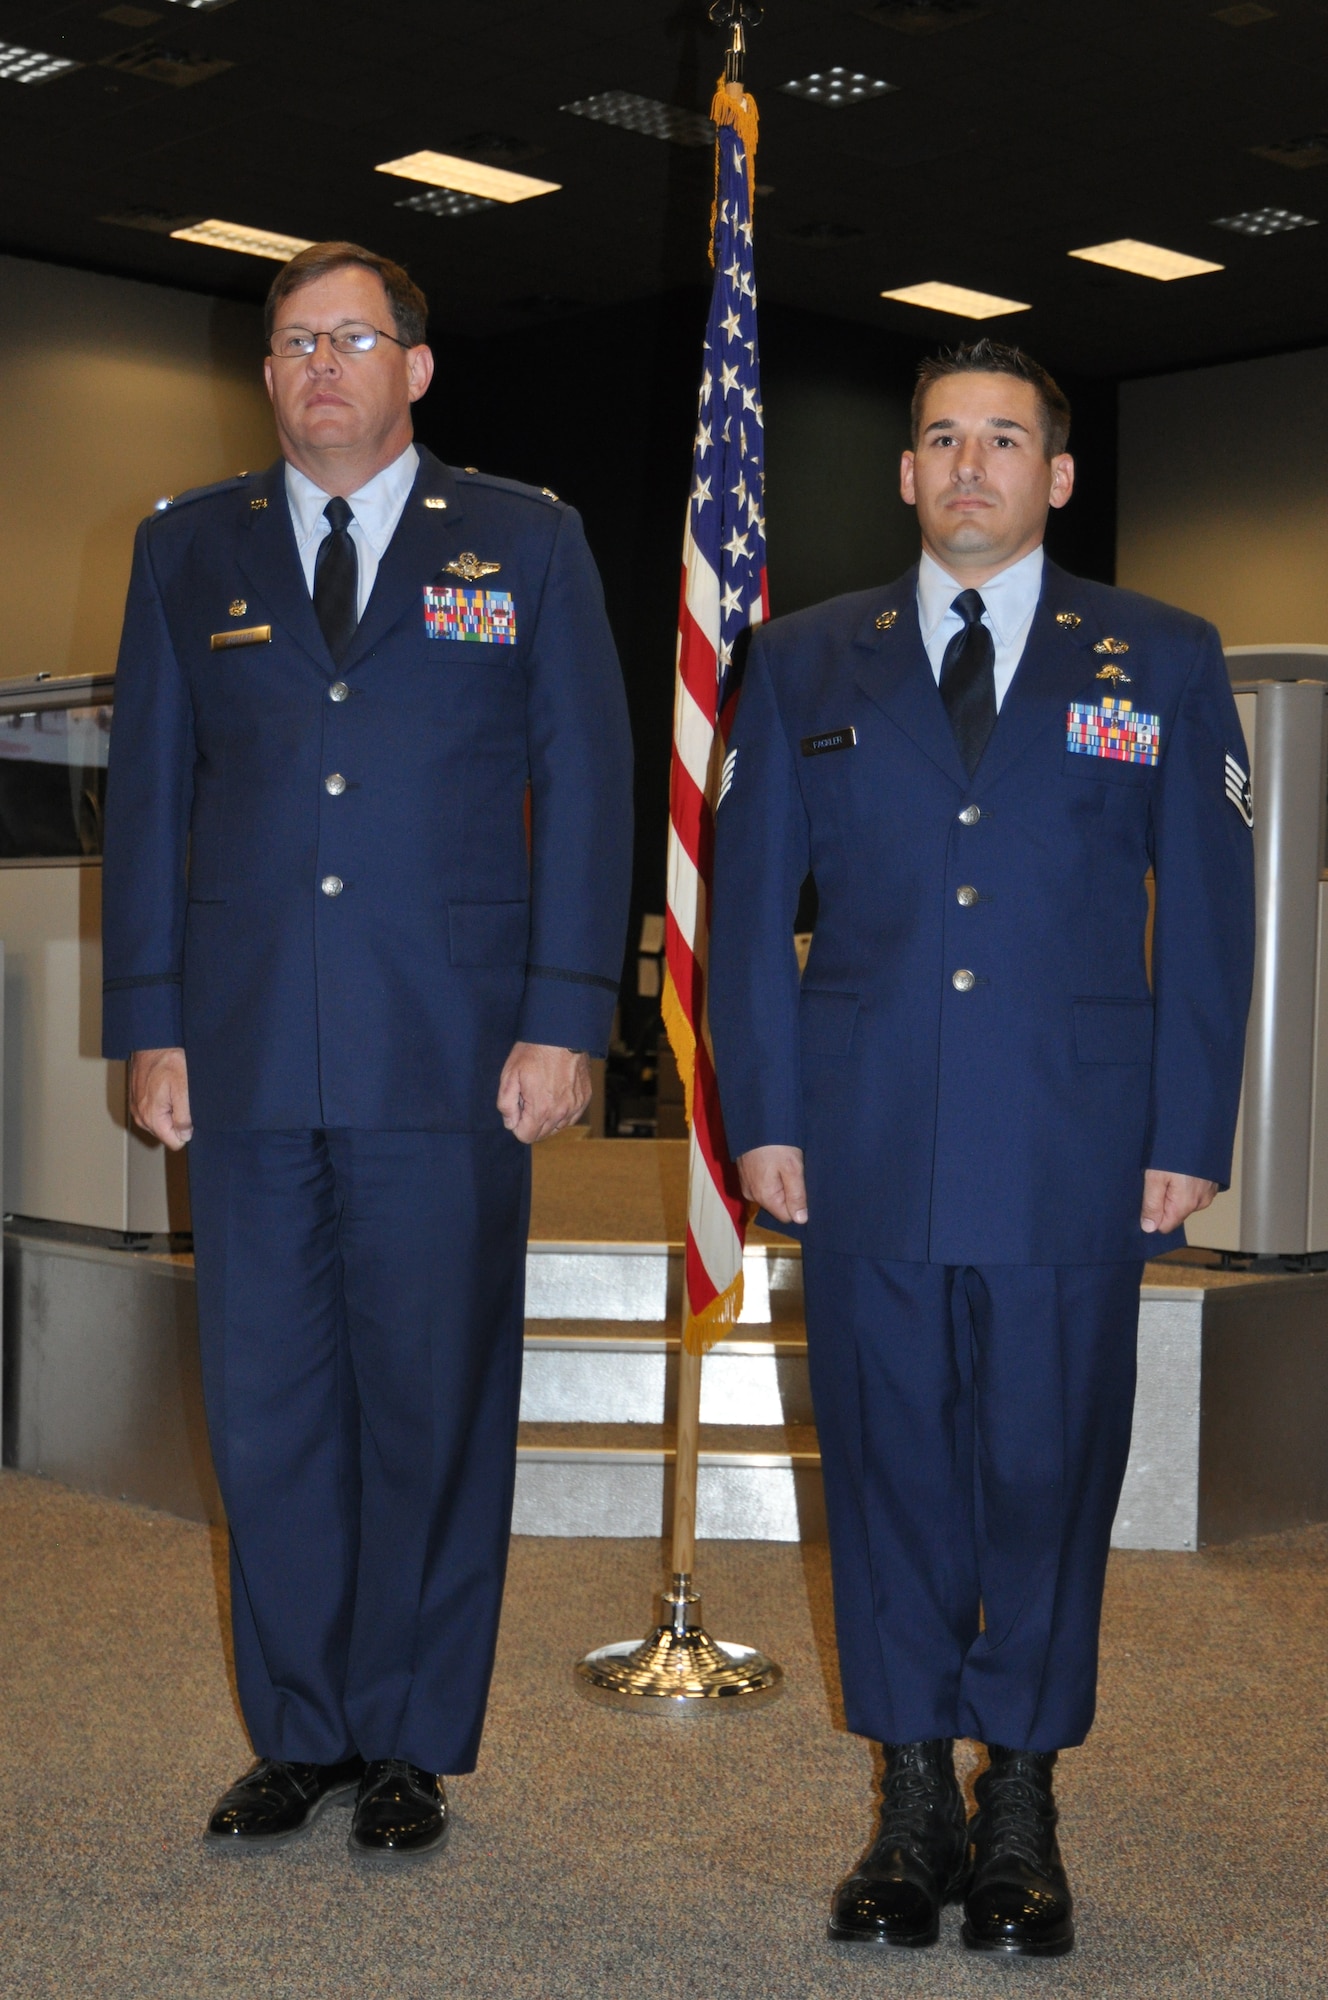 Col. James Bortree, 612th Air and Space Operations Center commander, stands at attention with Staff Sgt. Staff Sgt. Darren C. Fackler, 612th AOC Survival, Evasion, Resistance and Escape specialist, during Fackler’s Purple Heart recognition ceremony at Davis-Monthan AFB, Ariz., April 4. (USAF photo by Master Sgt. Kelly Ogden/Released). 